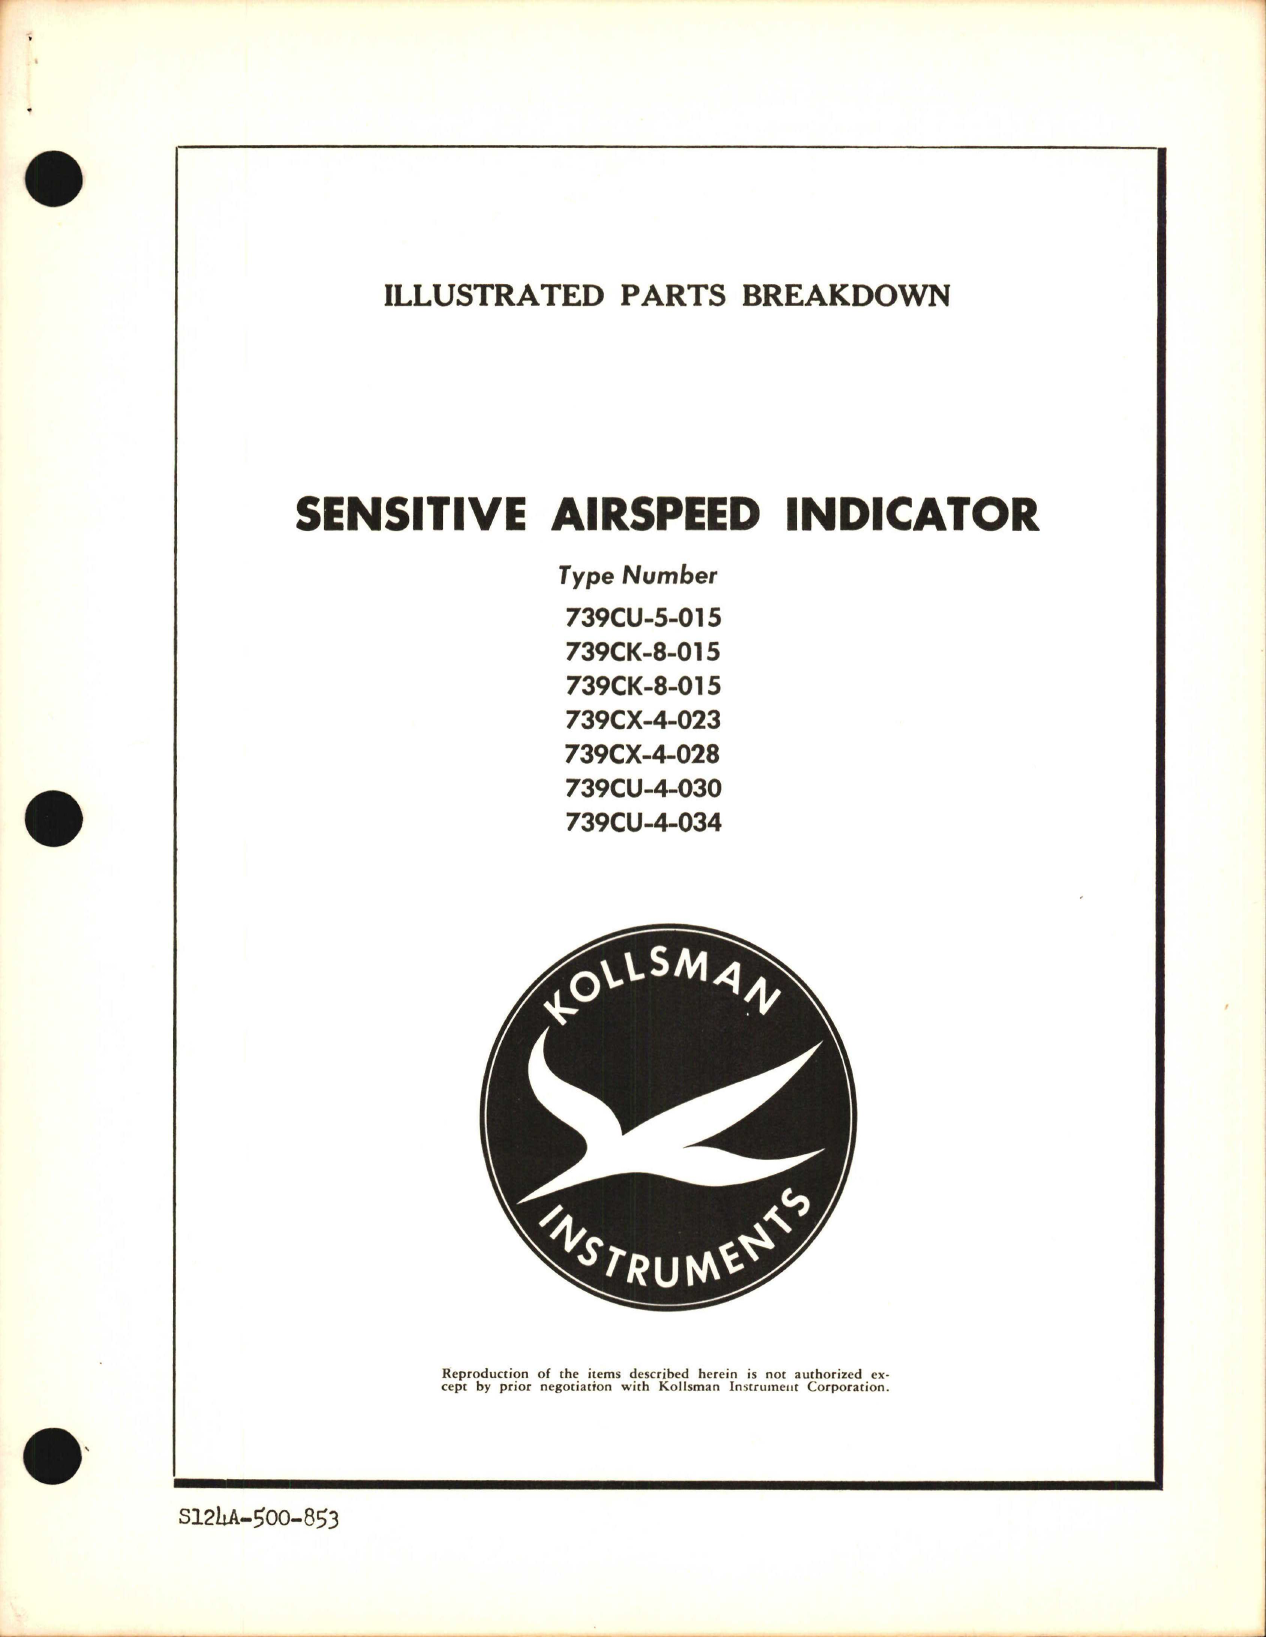 Sample page 1 from AirCorps Library document: Illustrated Parts Breakdown for Kollsman Sensitive Airspeed Indicator